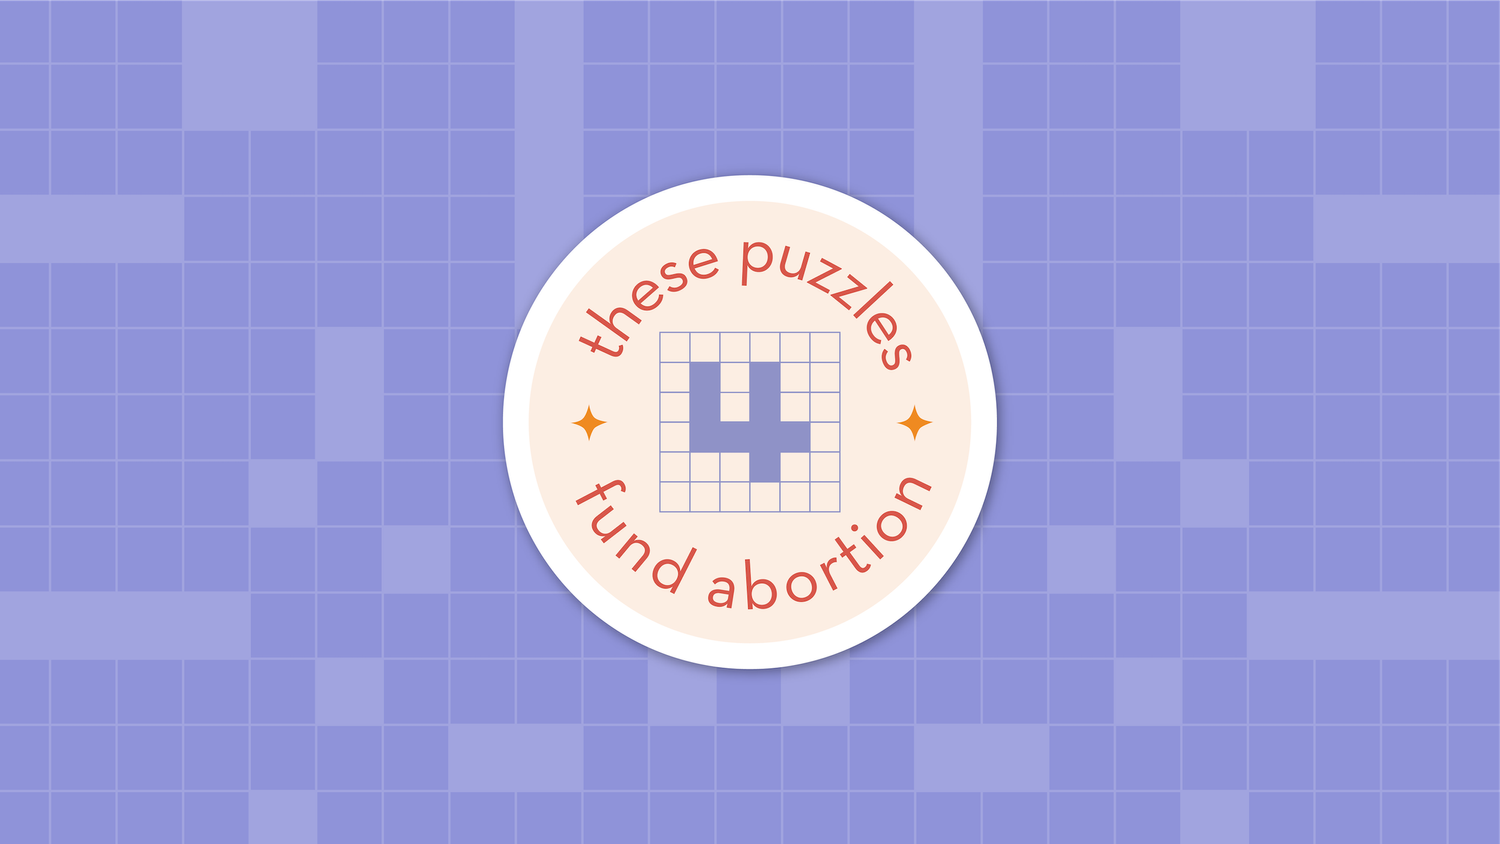 these puzzles fund abortion